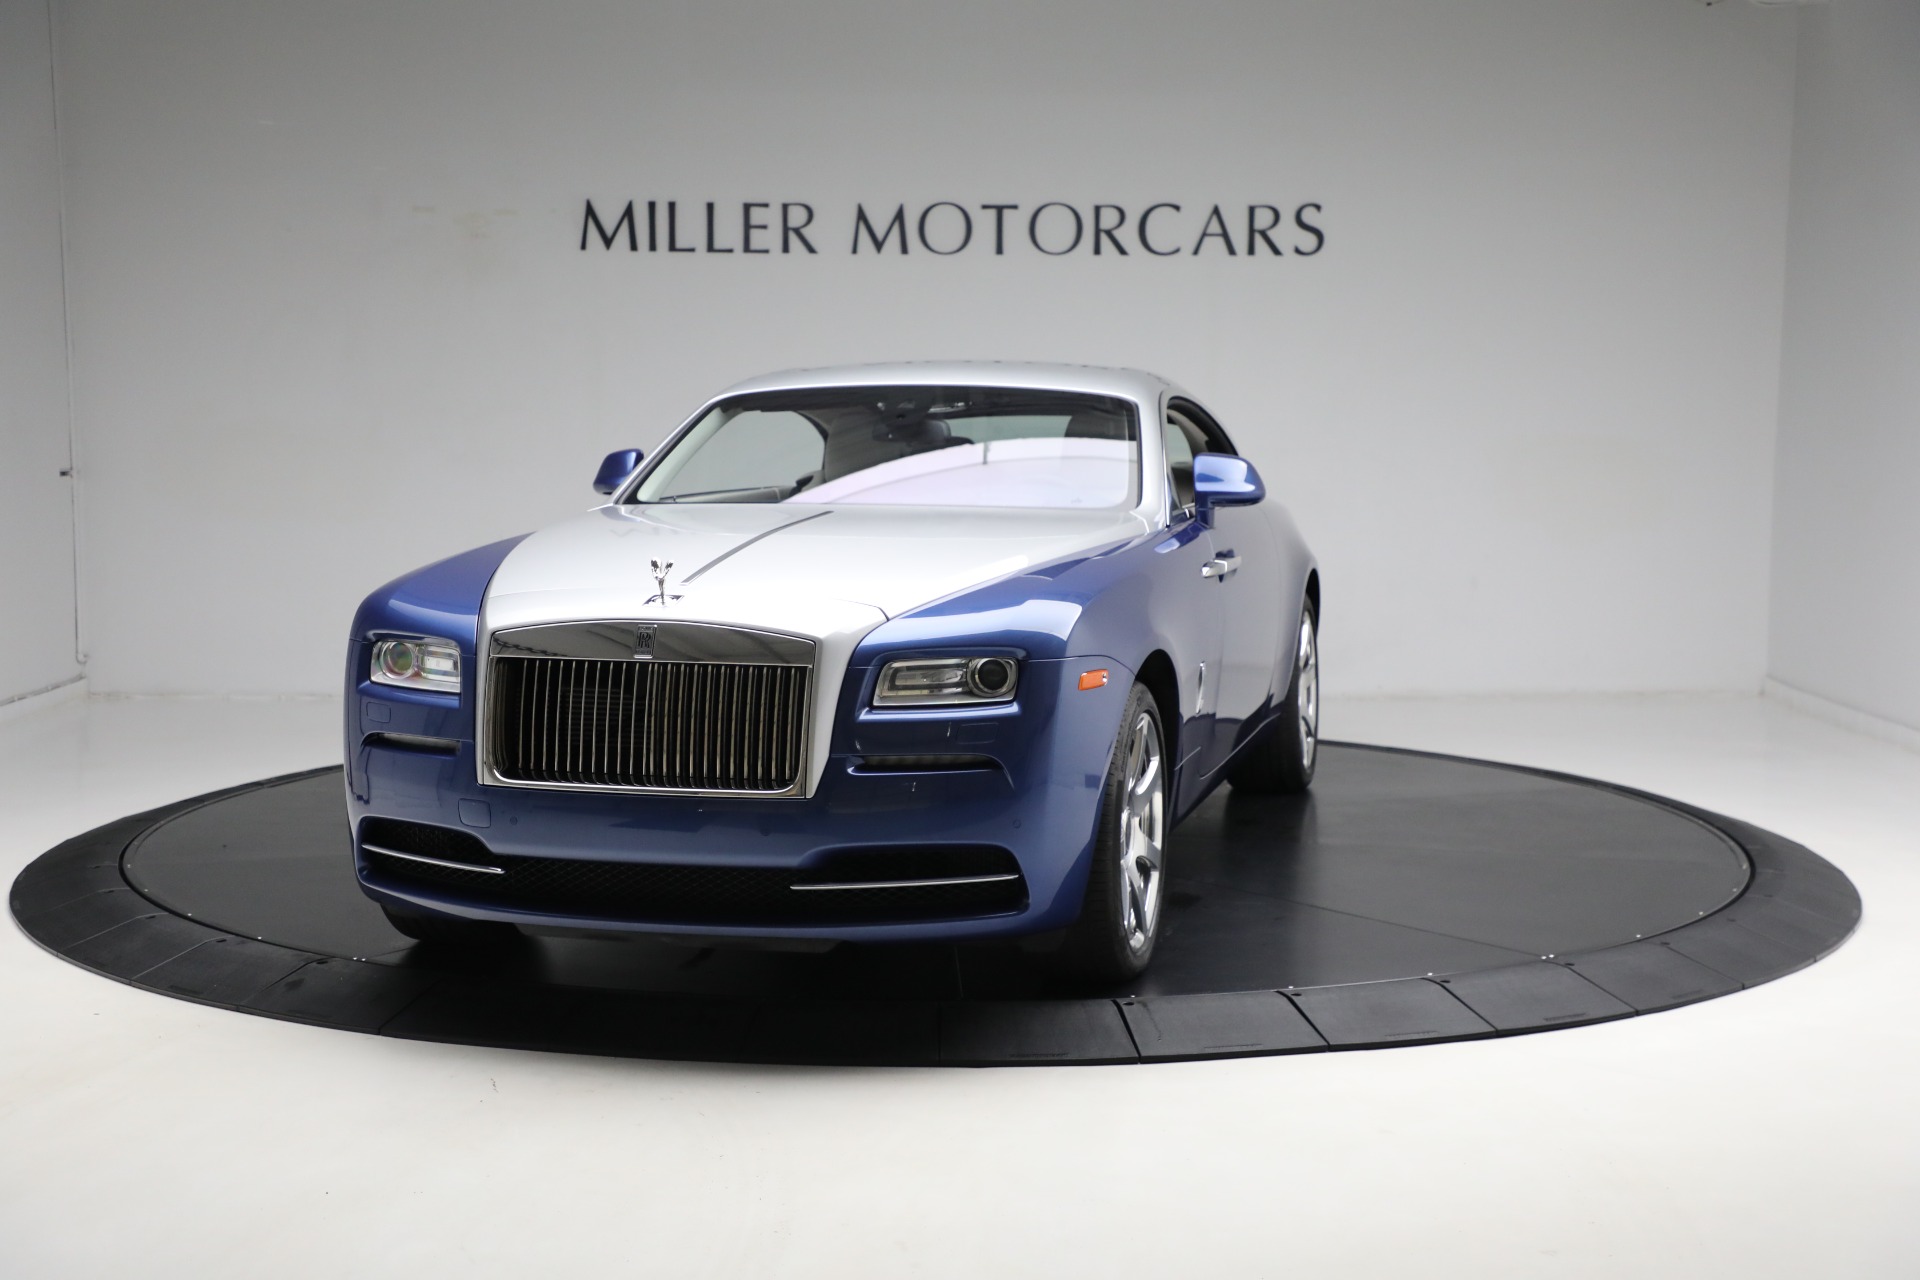 Used 2014 Rolls-Royce Wraith for sale Sold at Rolls-Royce Motor Cars Greenwich in Greenwich CT 06830 1